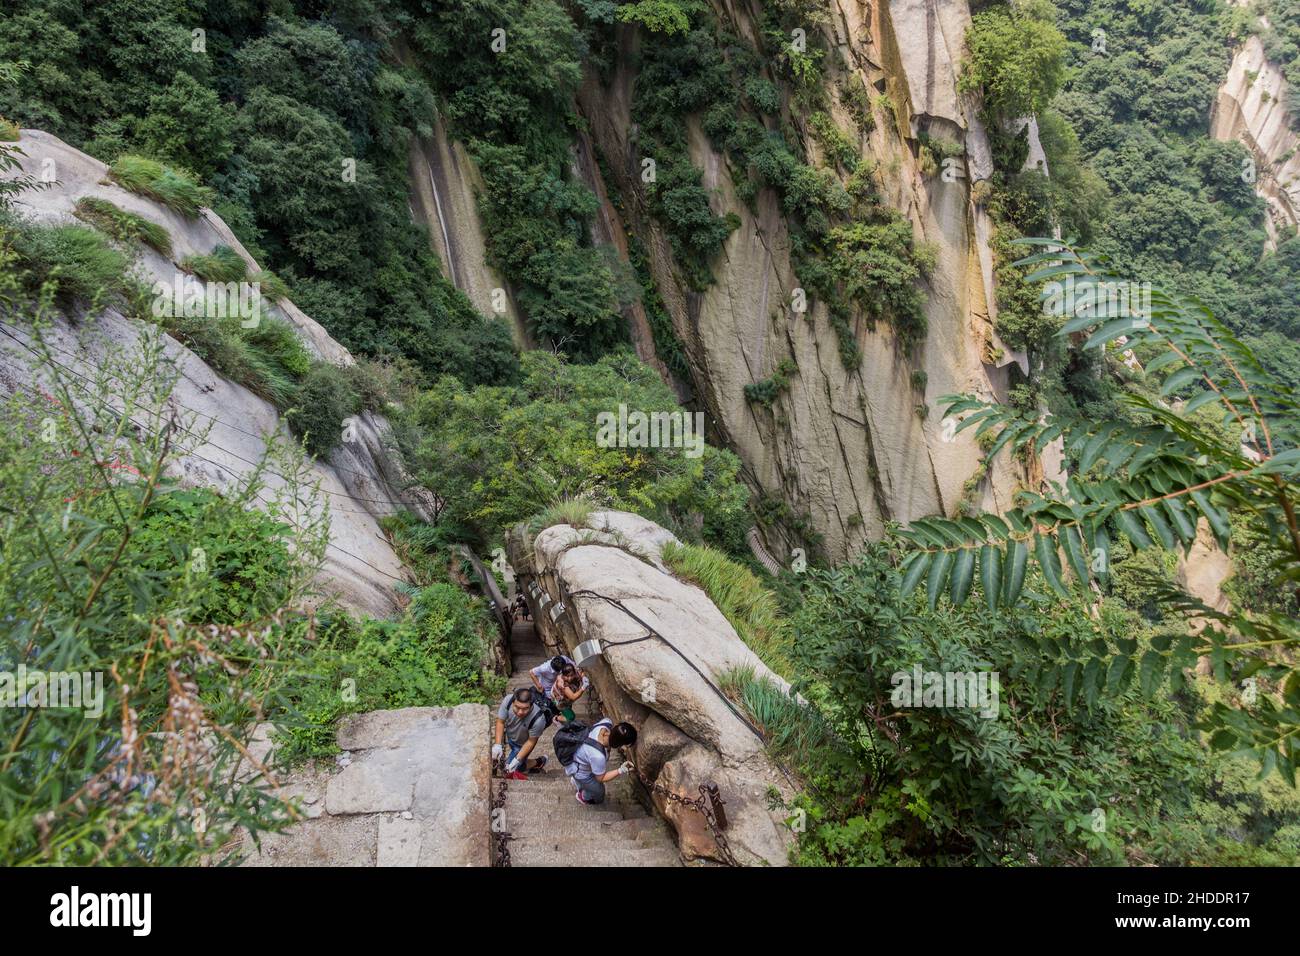 HUA SHAN, CHINA - AUGUST 4, 2018: People climb at the stairs leading to the peaks of Hua Shan mountain, China Stock Photo